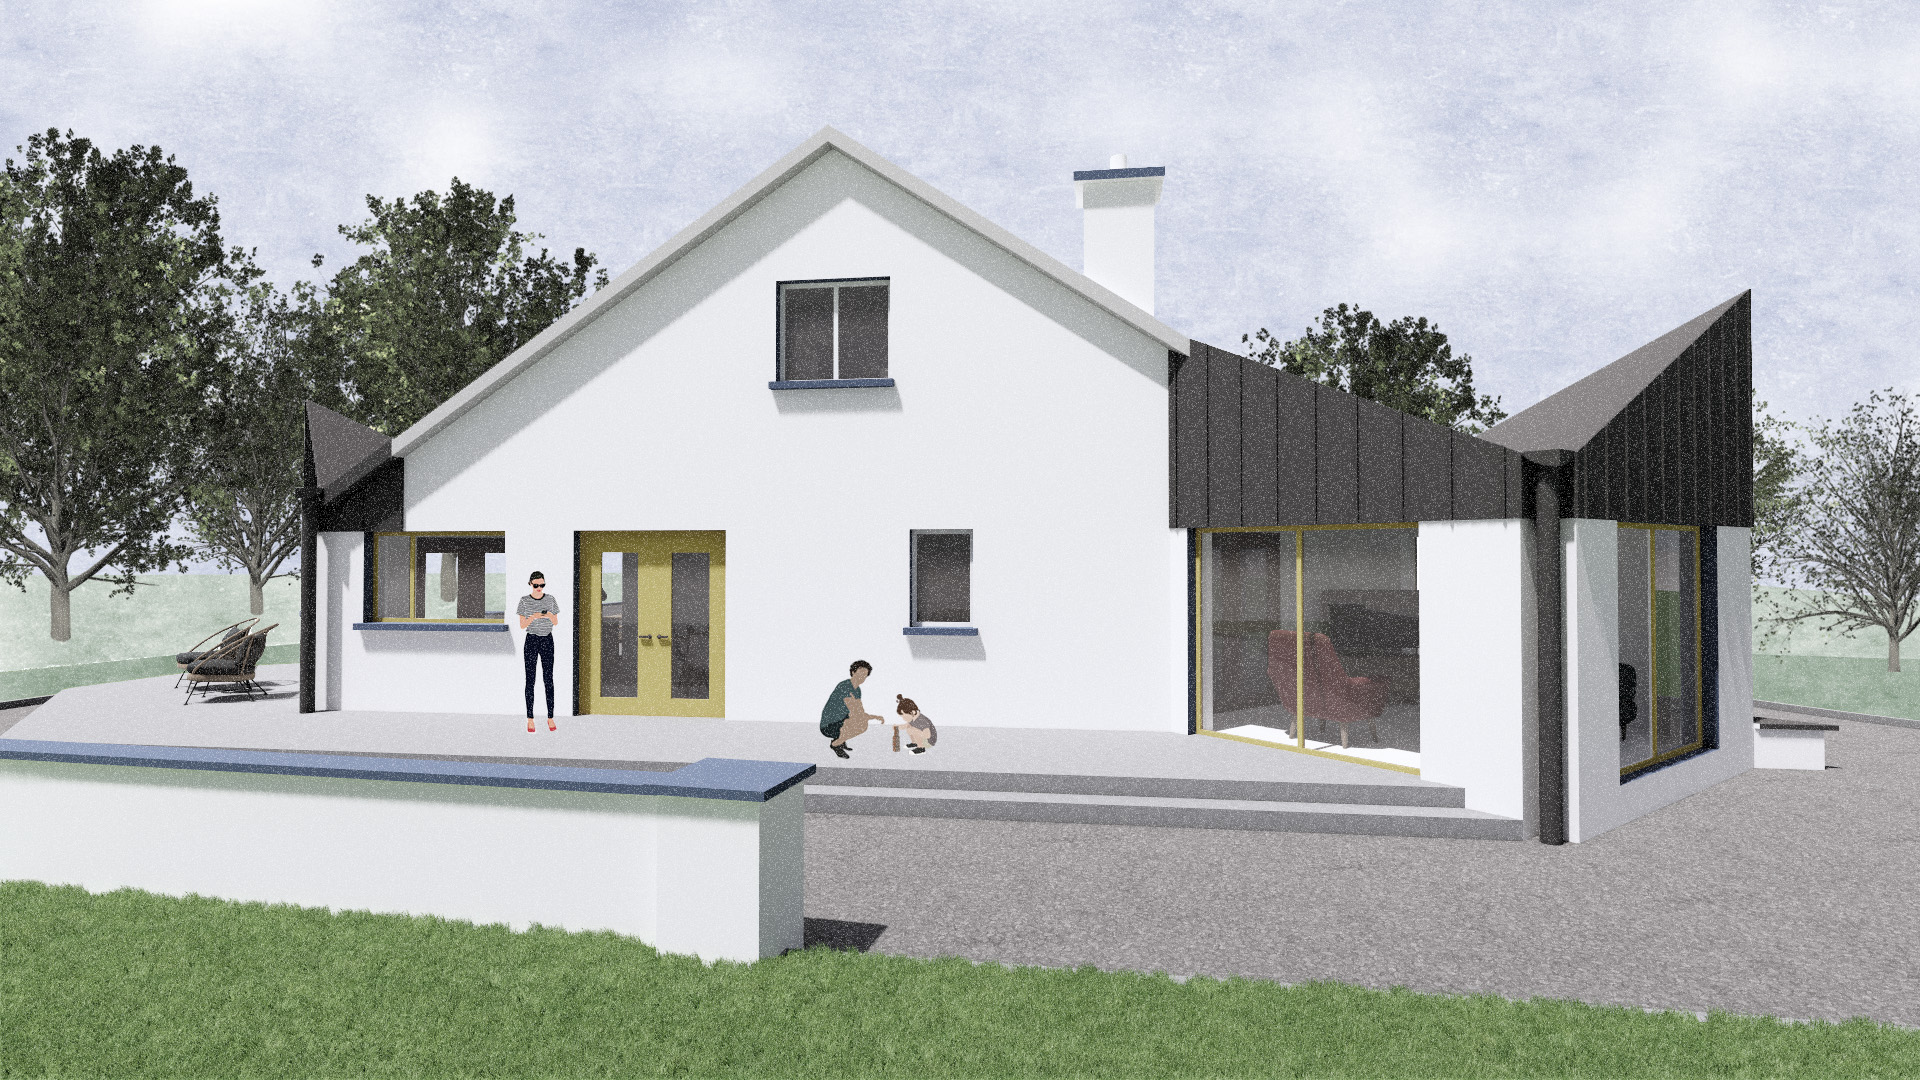 Renovation and extension near Ballyshannon, Co. Donegal